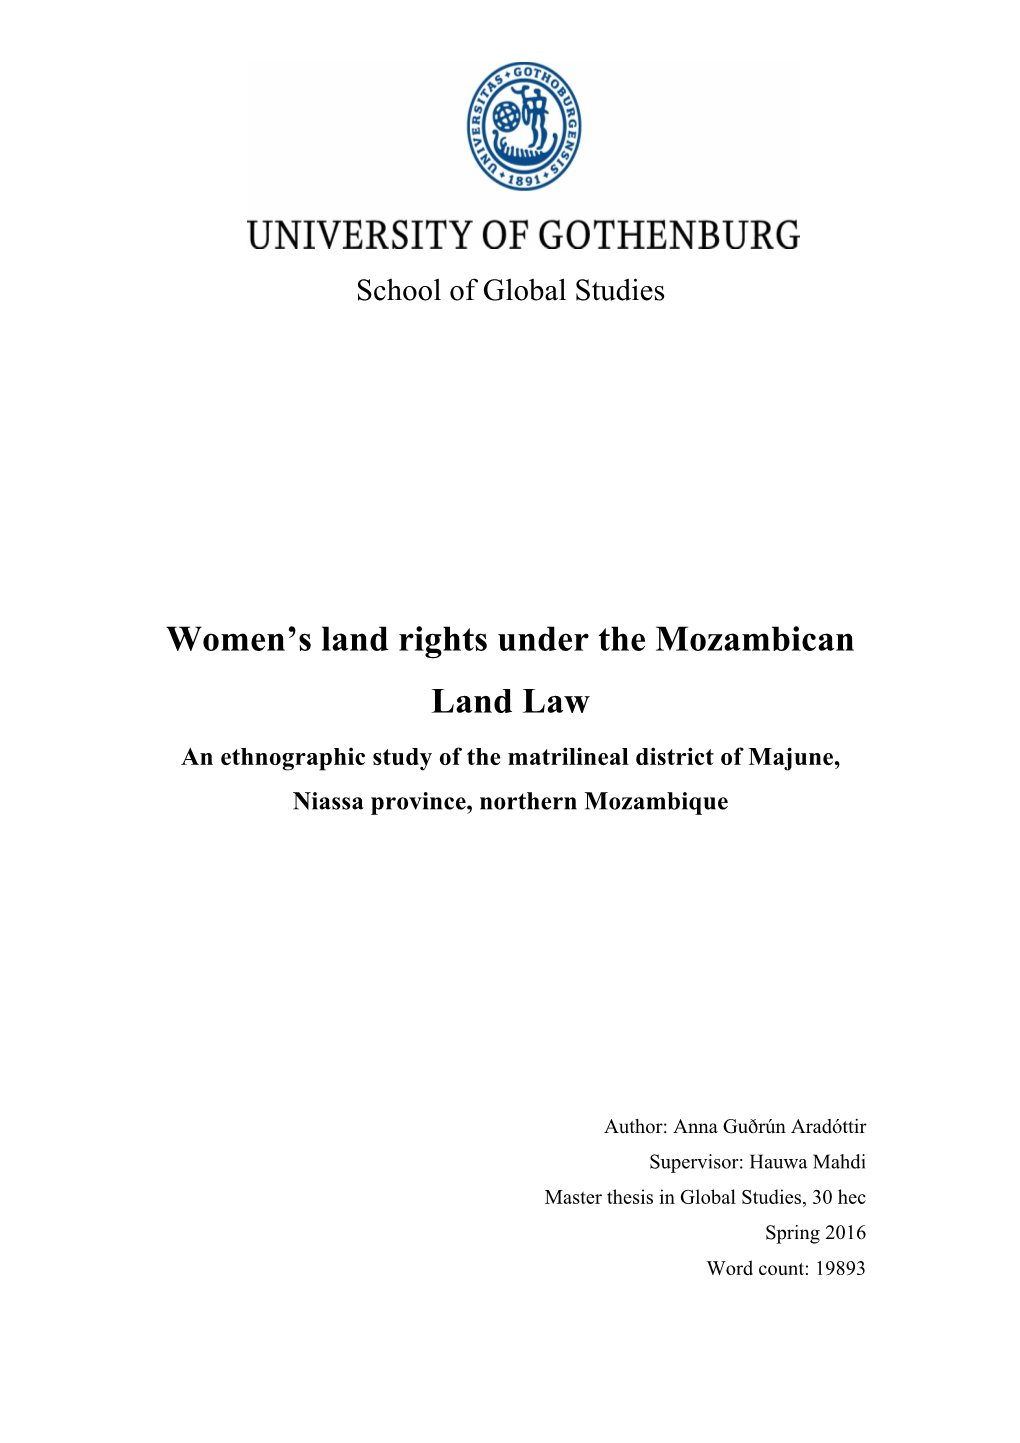 Women's Land Rights Under the Mozambican Land